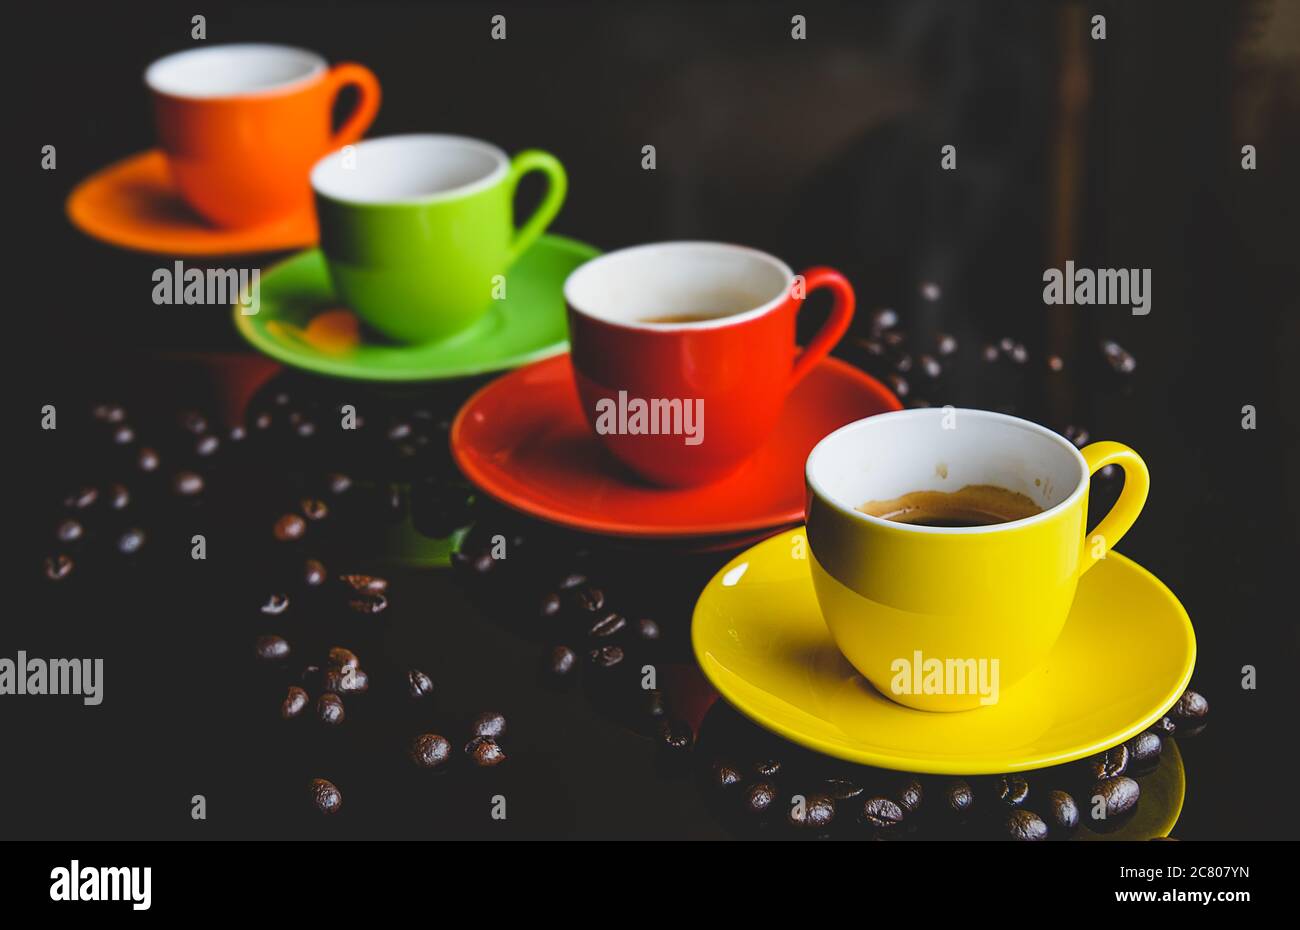 Colorful of espresso coffee cups setting with dark background and coffee bean. Stock Photo